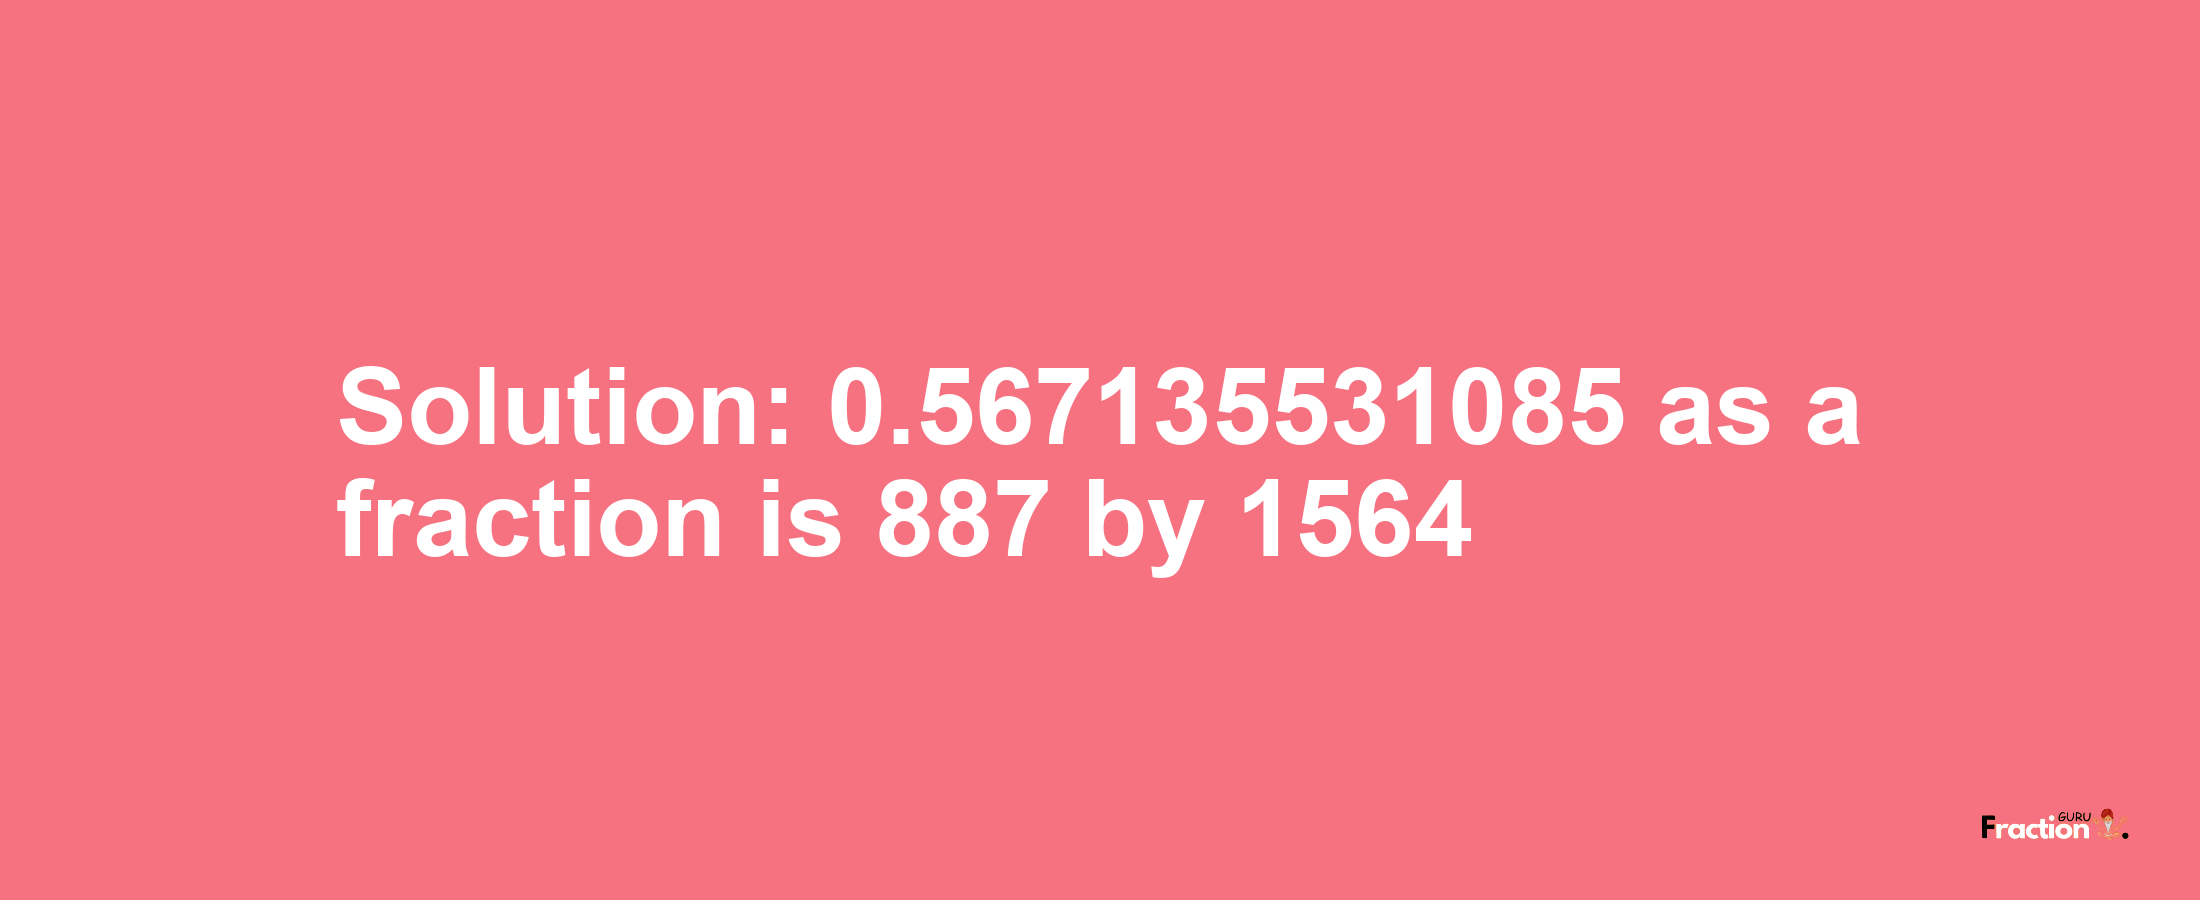 Solution:0.567135531085 as a fraction is 887/1564